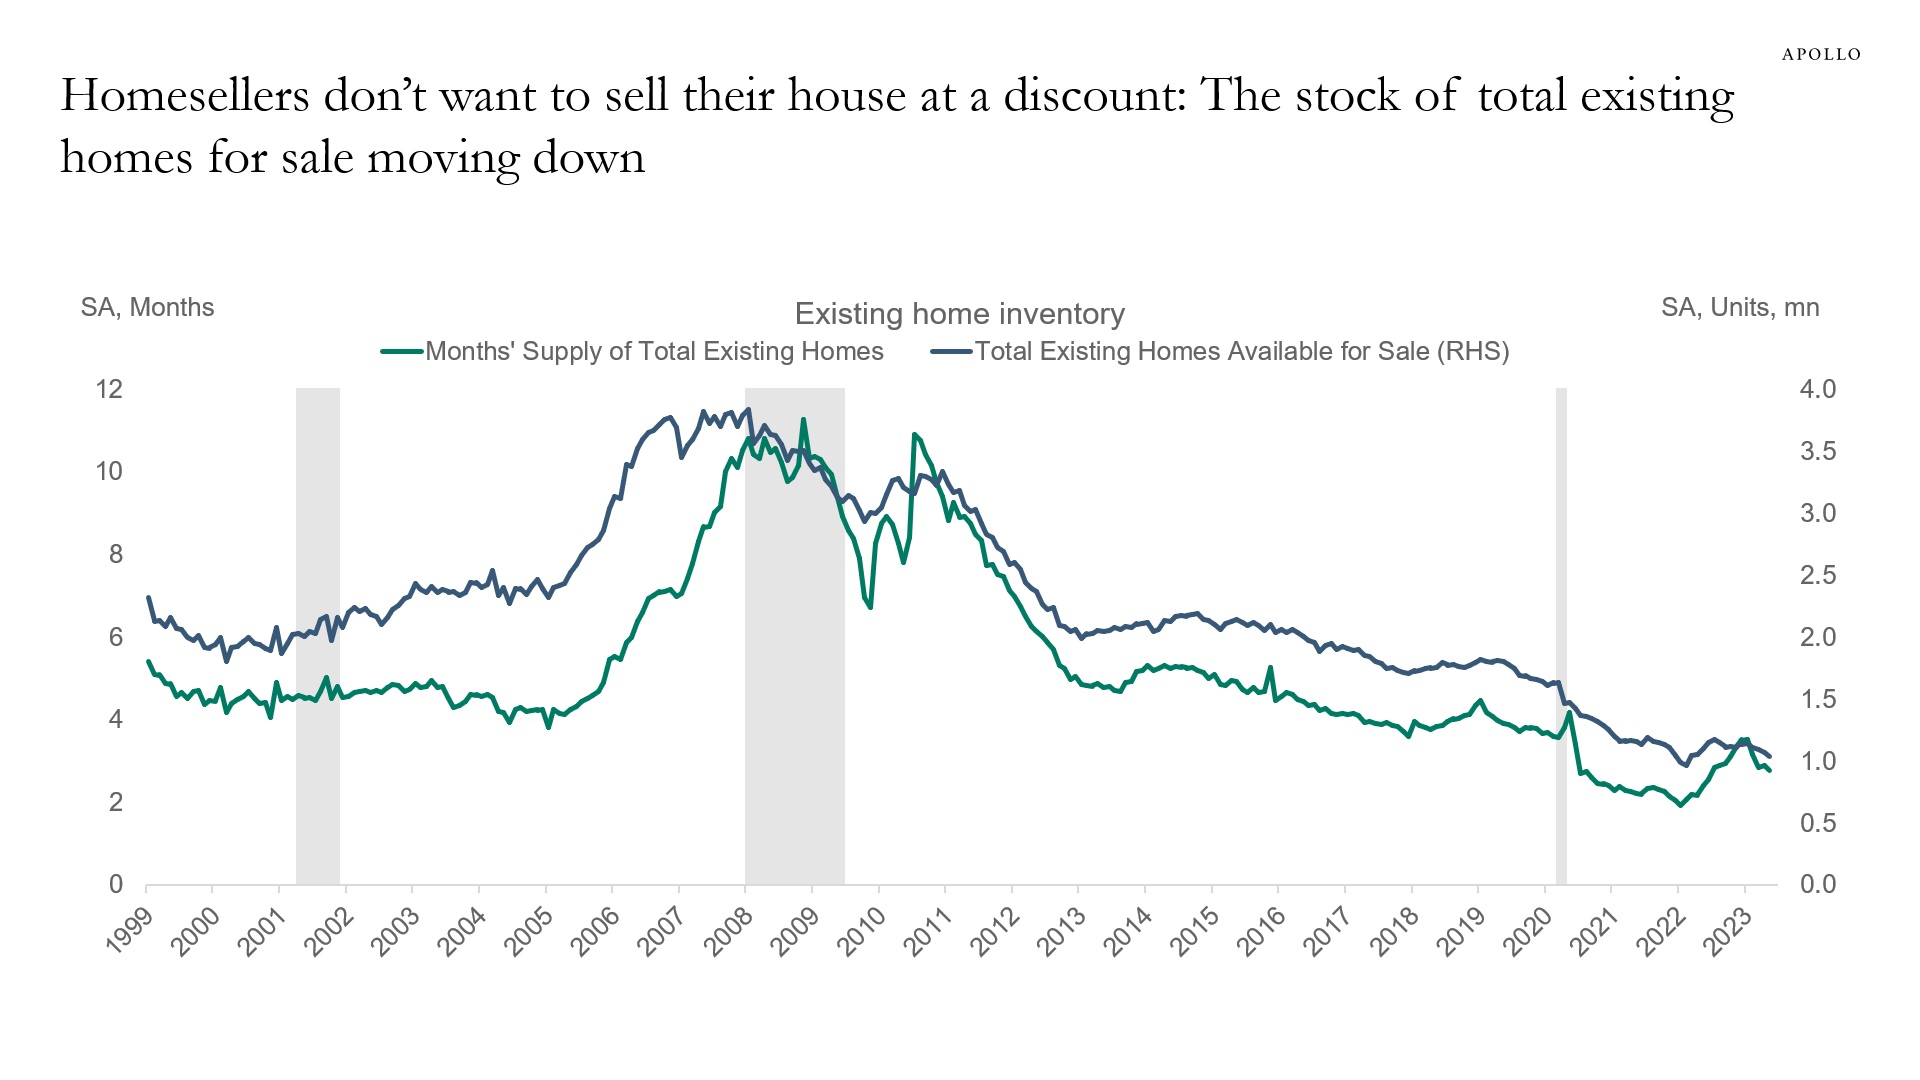 Supply of homes for sales is moving lower